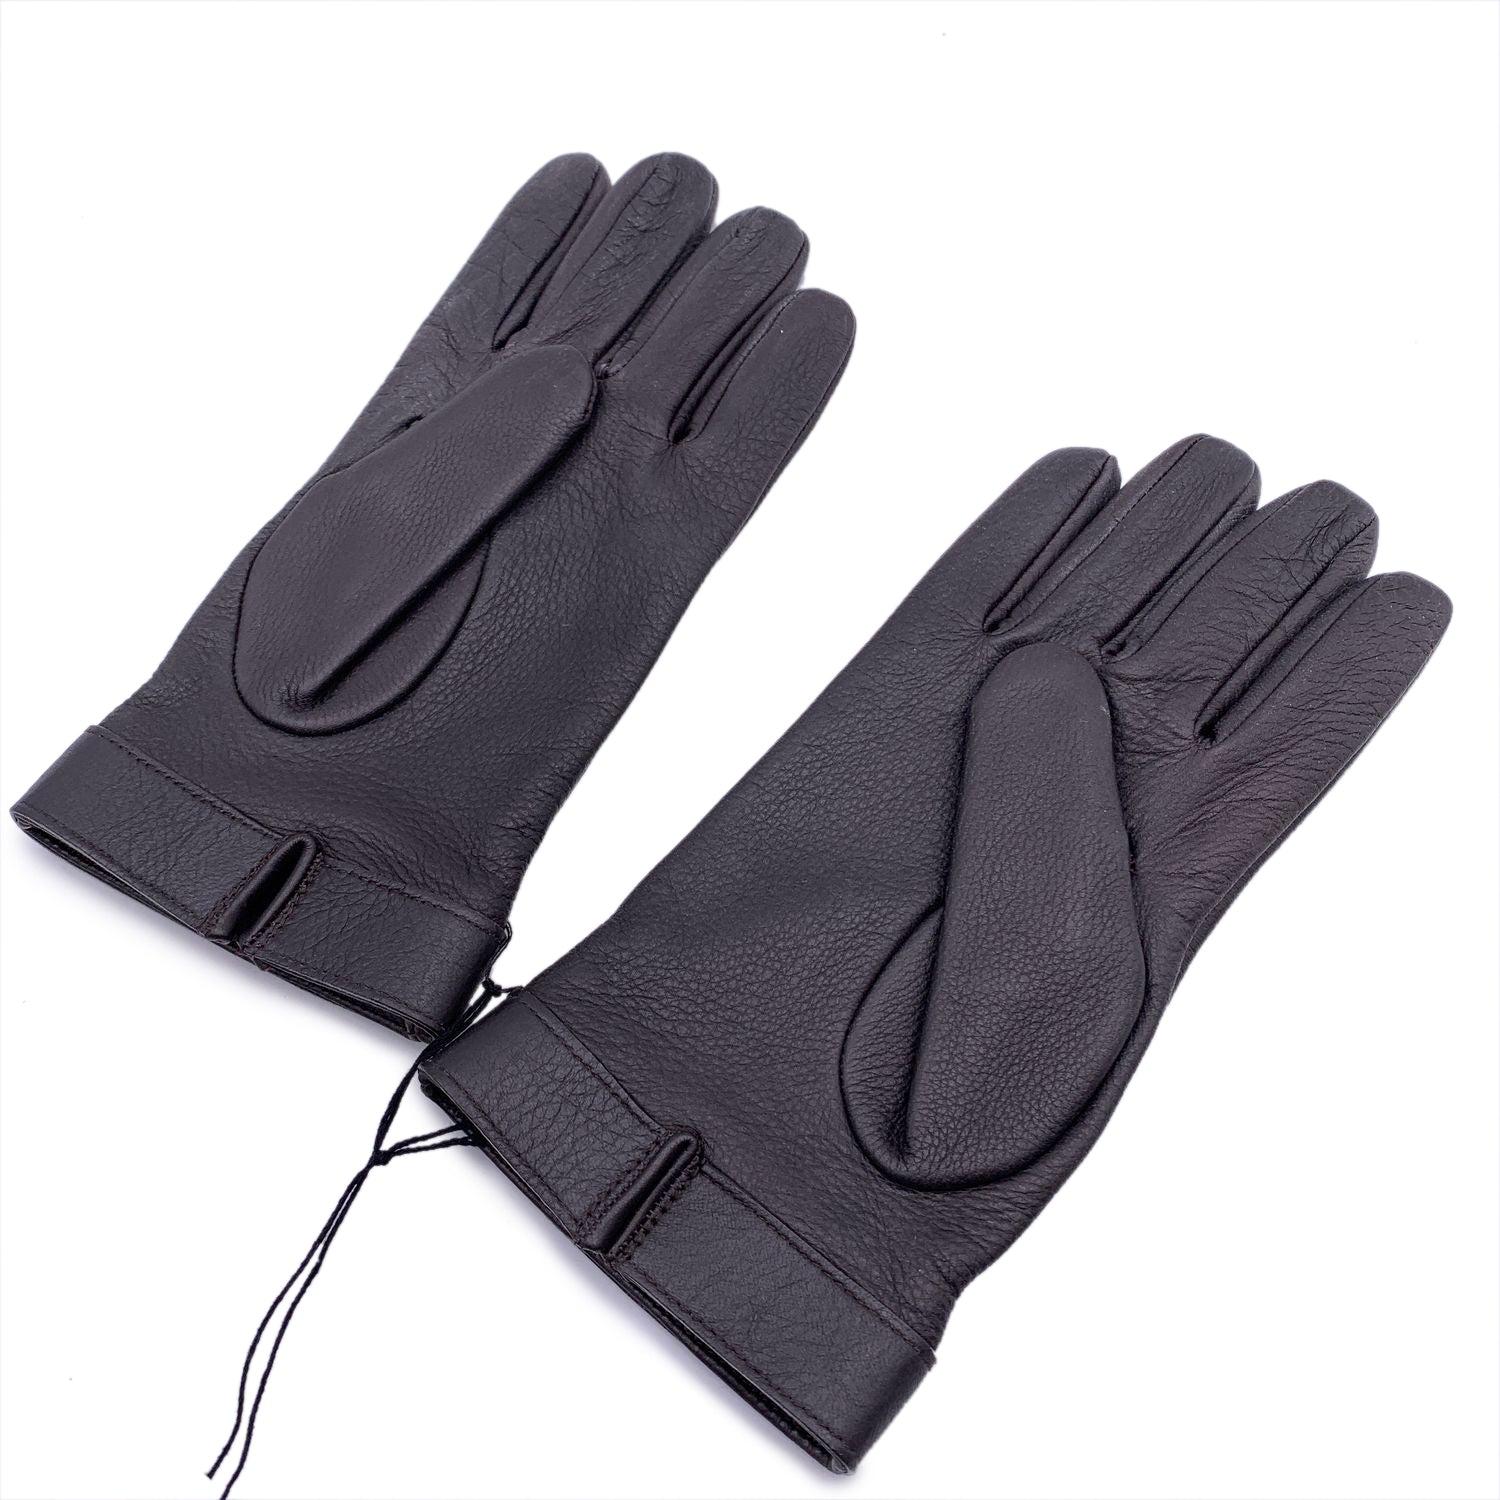 Elegant Gloves by Gucci. Dark brown leather with GG Gold and silver metal logo detail. Composition: 100% leather. Lining: 100% cashmere. Size 9 L Details MATERIAL: Leather COLOR: Brown MODEL: - GENDER: Unisex Adults COUNTRY OF MANUFACTURE: Italy